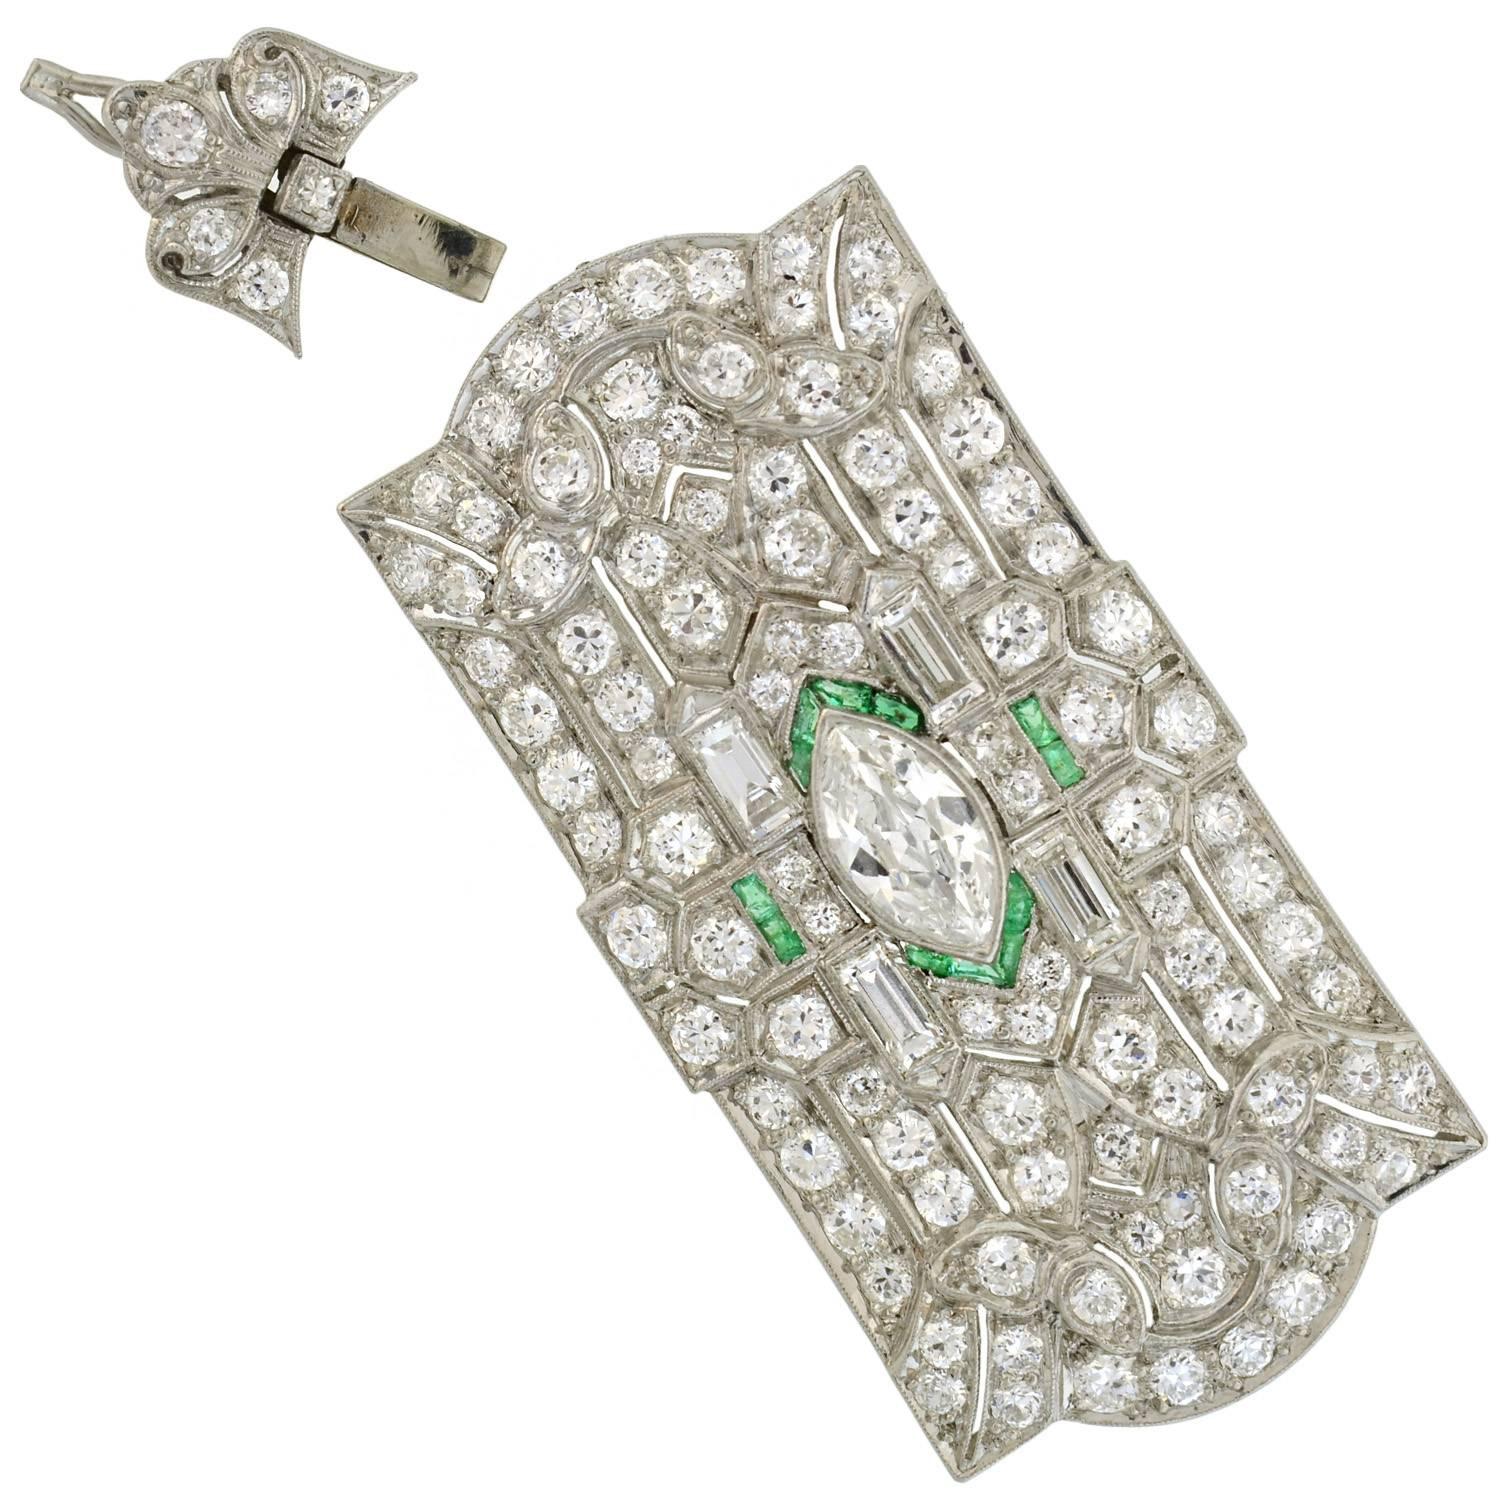 A spectacular diamond and emerald pin/pendant from the Art Deco (ca1920) era! This stunning piece is made of platinum and particularly large in size and can easily be worn as a pin or pendant. Depicting an incredible Deco design, the pin/pendant has